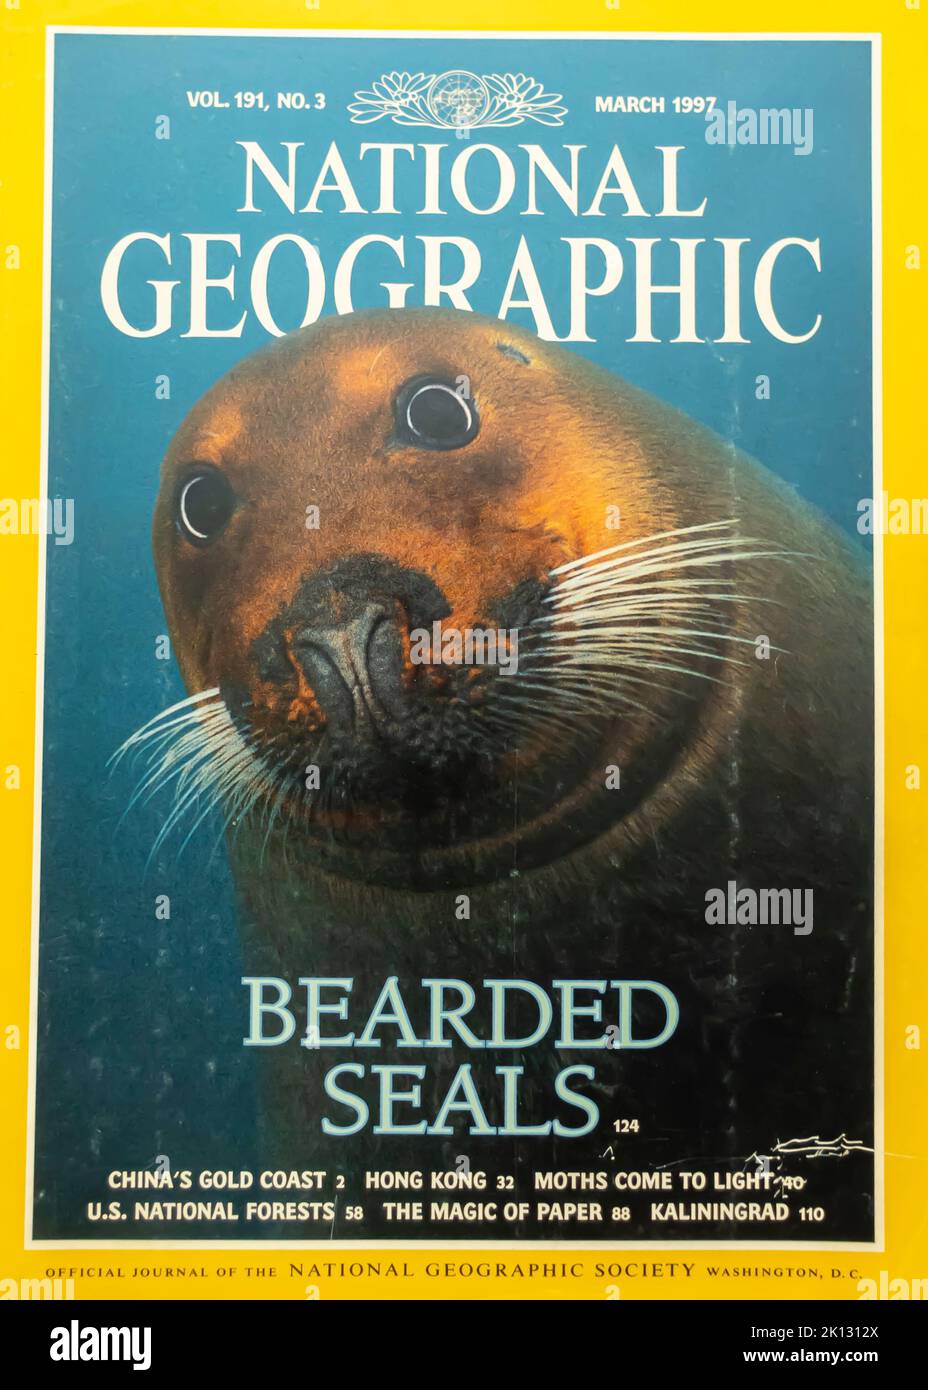 National Geographic magazine cover, March 1997 Stock Photo